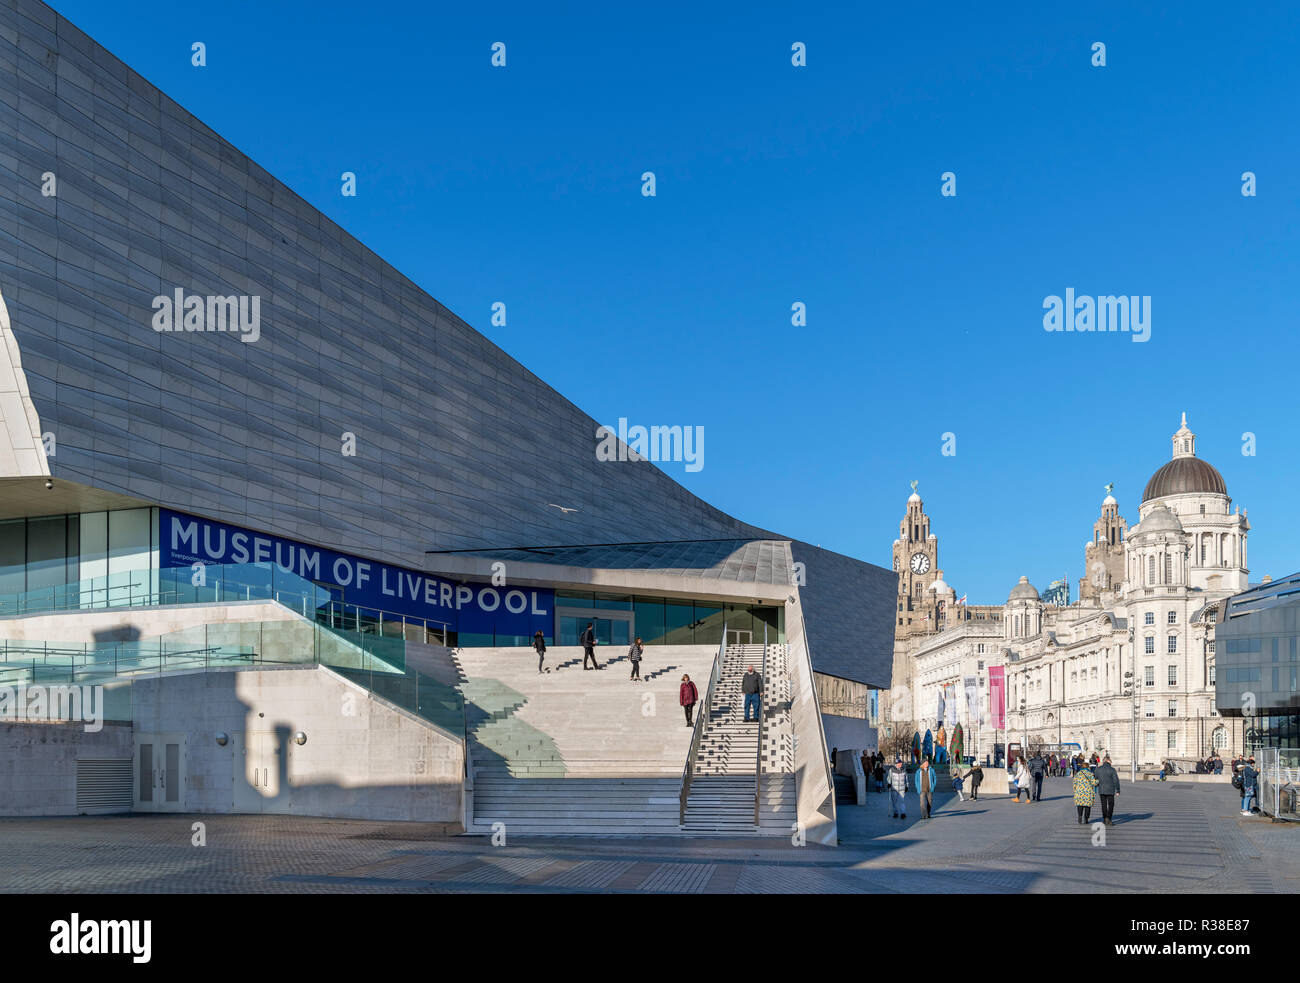 The Museum of Liverpool with the Three Graces behind, Pier Head, Liverpool, Merseyside, England, UK Stock Photo